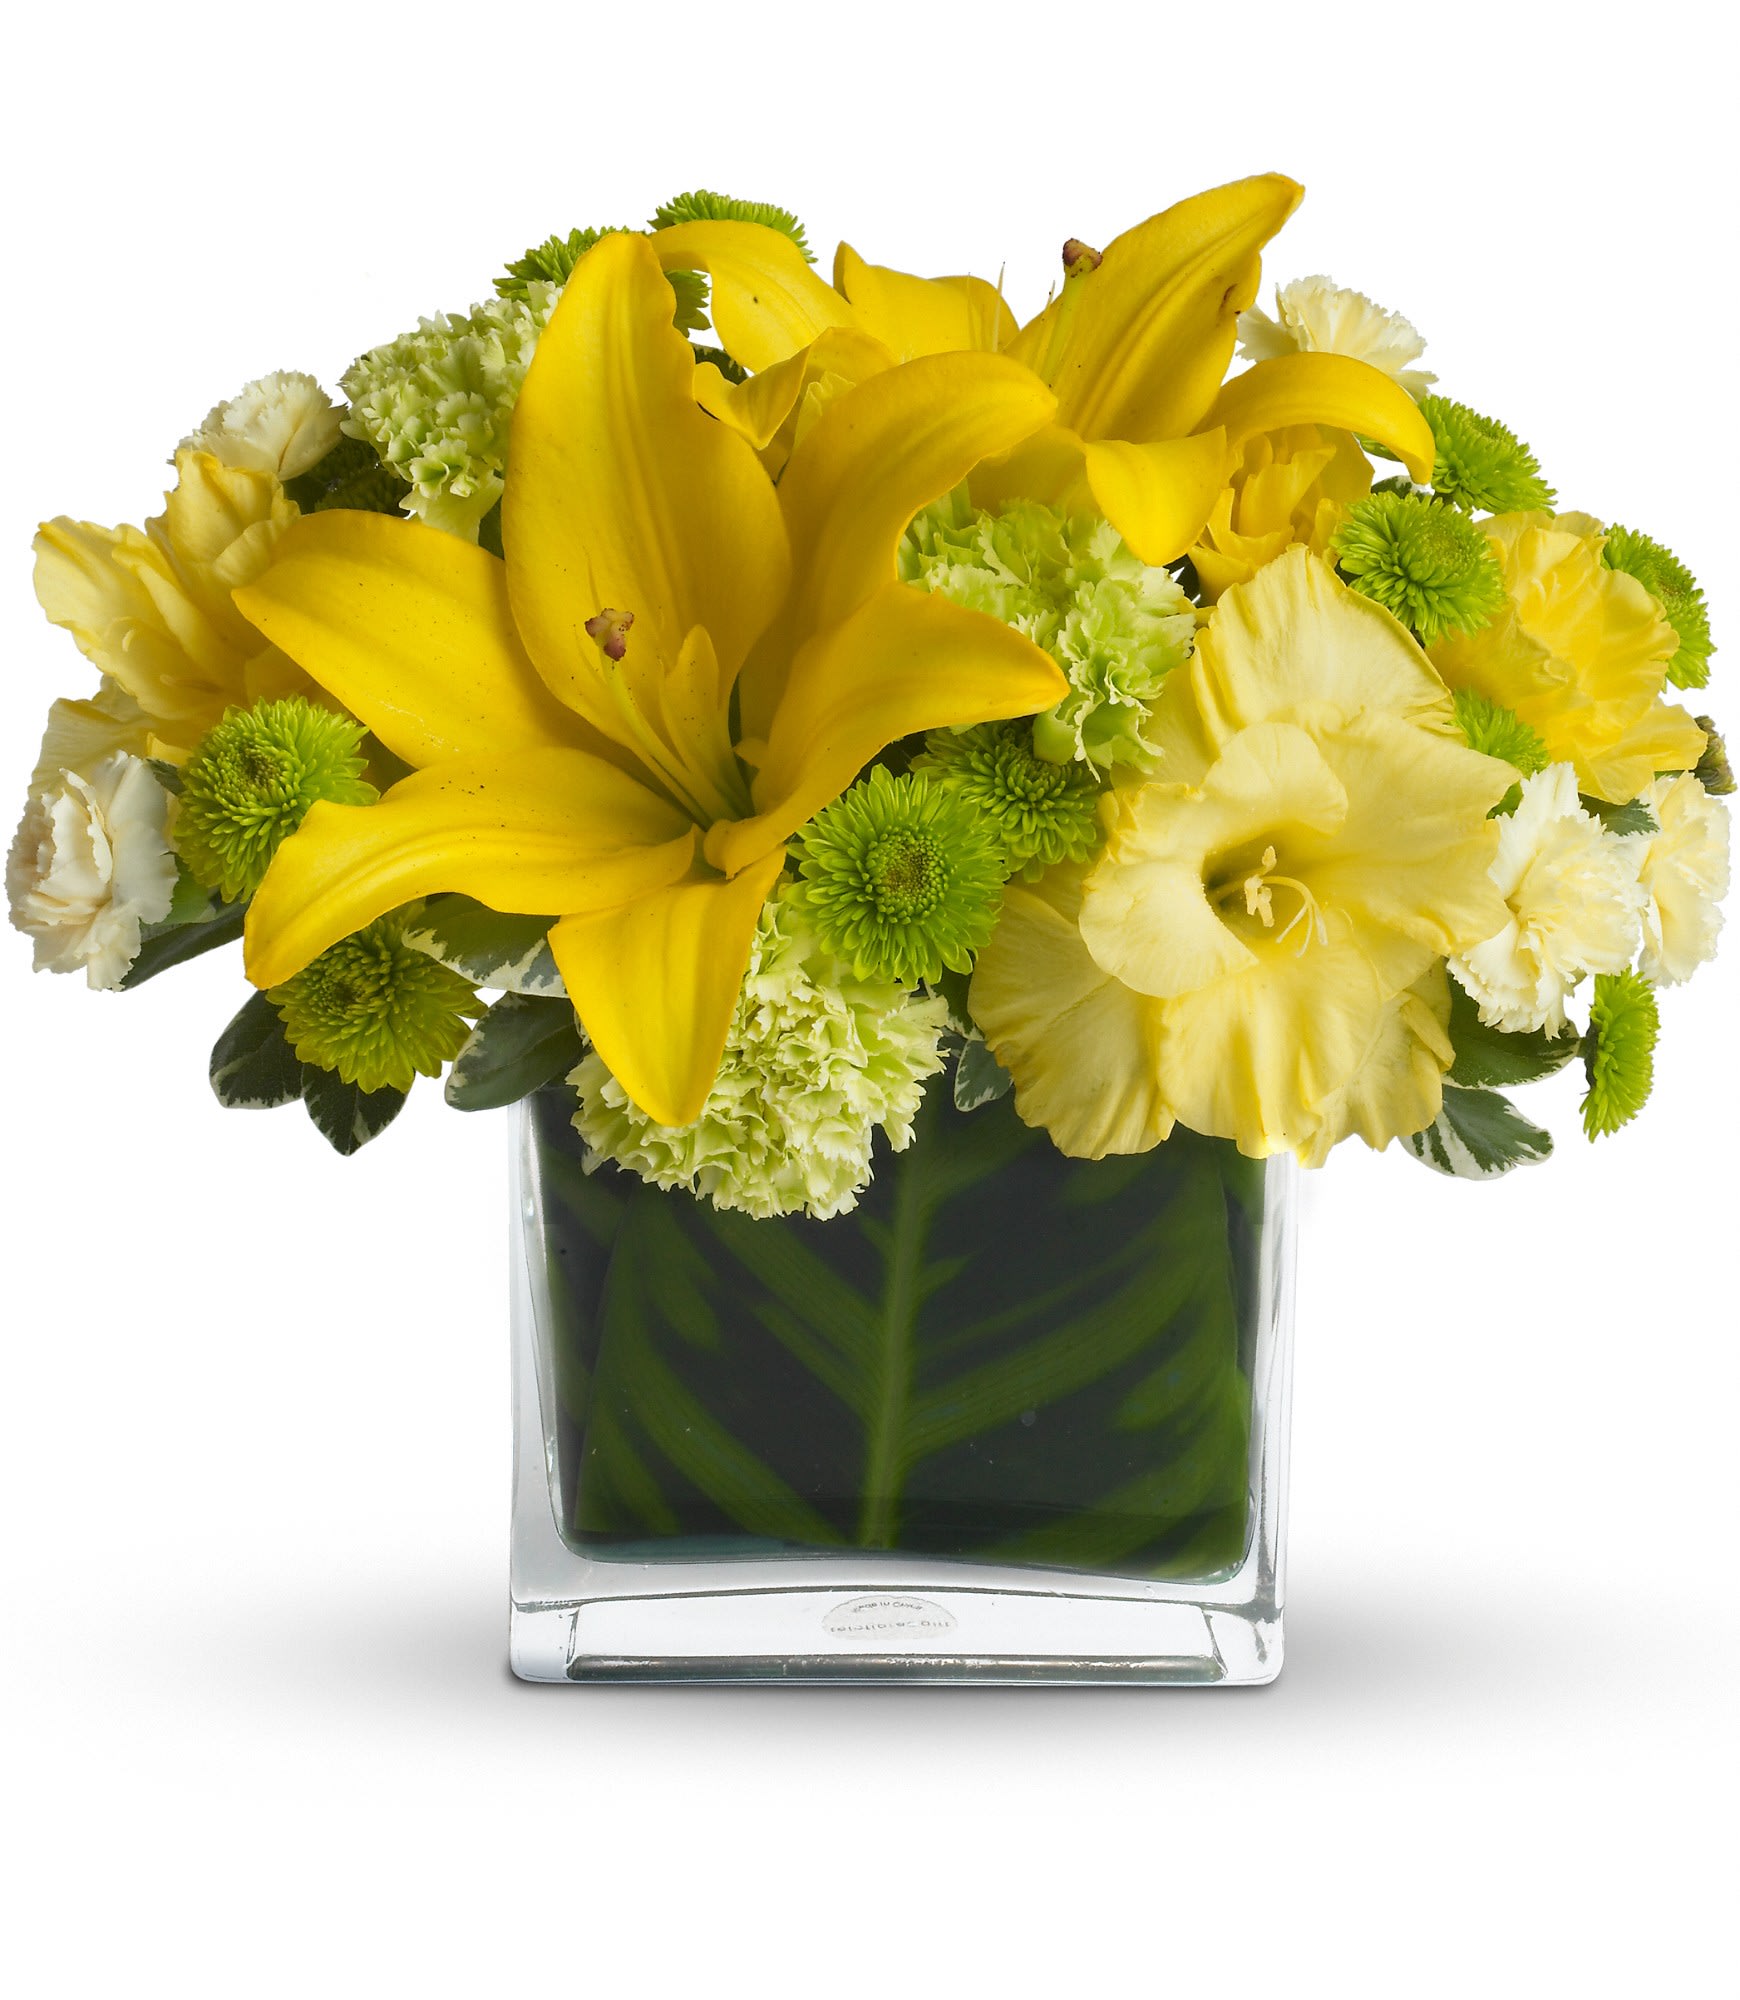 Oh Happy Day by Teleflora - Oh, what a happy day it will be for whoever is lucky enough to have this vase full of joyful and jubilant blossoms delivered to them. Perfect for Happy Birthday or Happy Any Day, this pretty arrangement is sure to inspire smiles!    Dazzling green roses, carnations and button spray chrysanthemums, yellow asiatic lilies and gladioli along with fresh greens fill a rectangular glass vase. Come on! Say it and send it like you mean itâ¦ Oh Happy Day!    Approximately 12&quot; W x 10&quot; H    Orientation: All-Around    As Shown : T27-1A  Deluxe : T27-1B  Premium : T27-1C